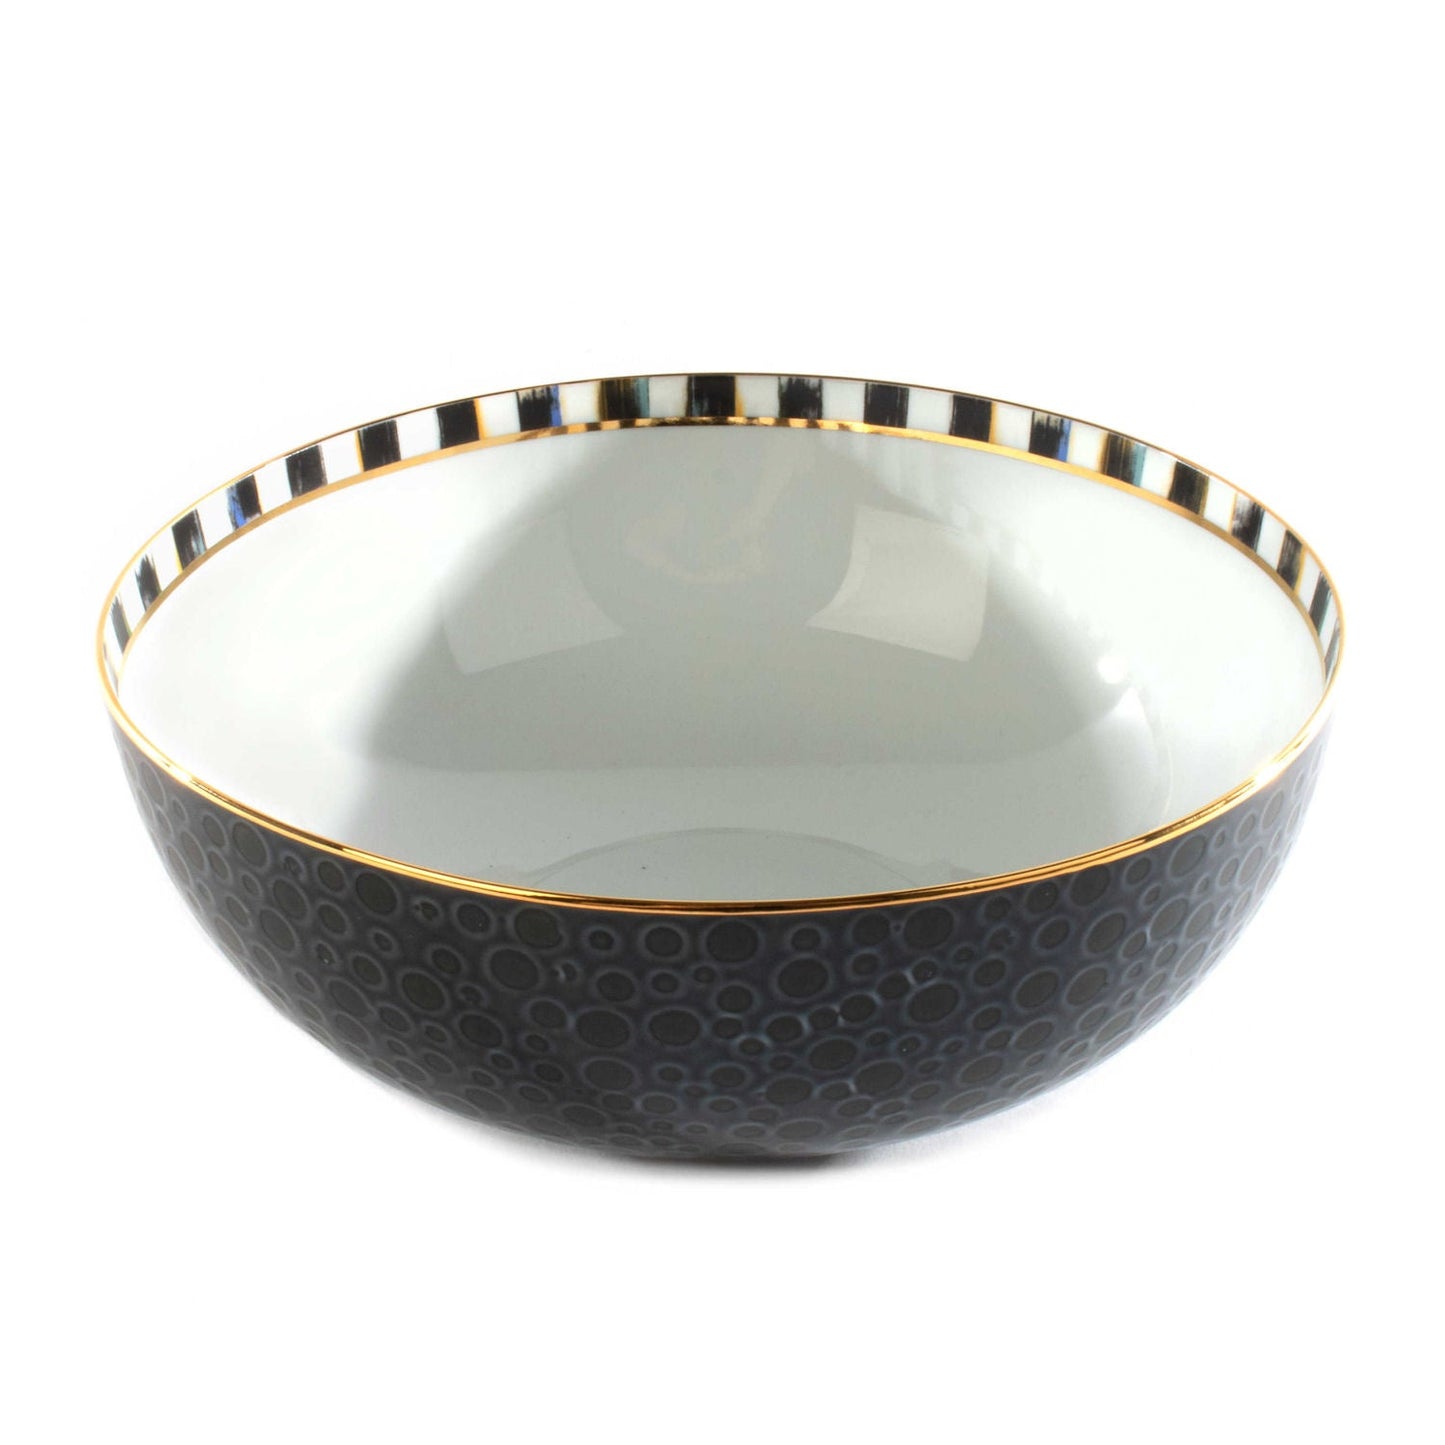 Luxury SoHo Serving Bowl by Mackenzie-Childs - Midnight - |VESIMI Design| Luxury and Rustic bathrooms online